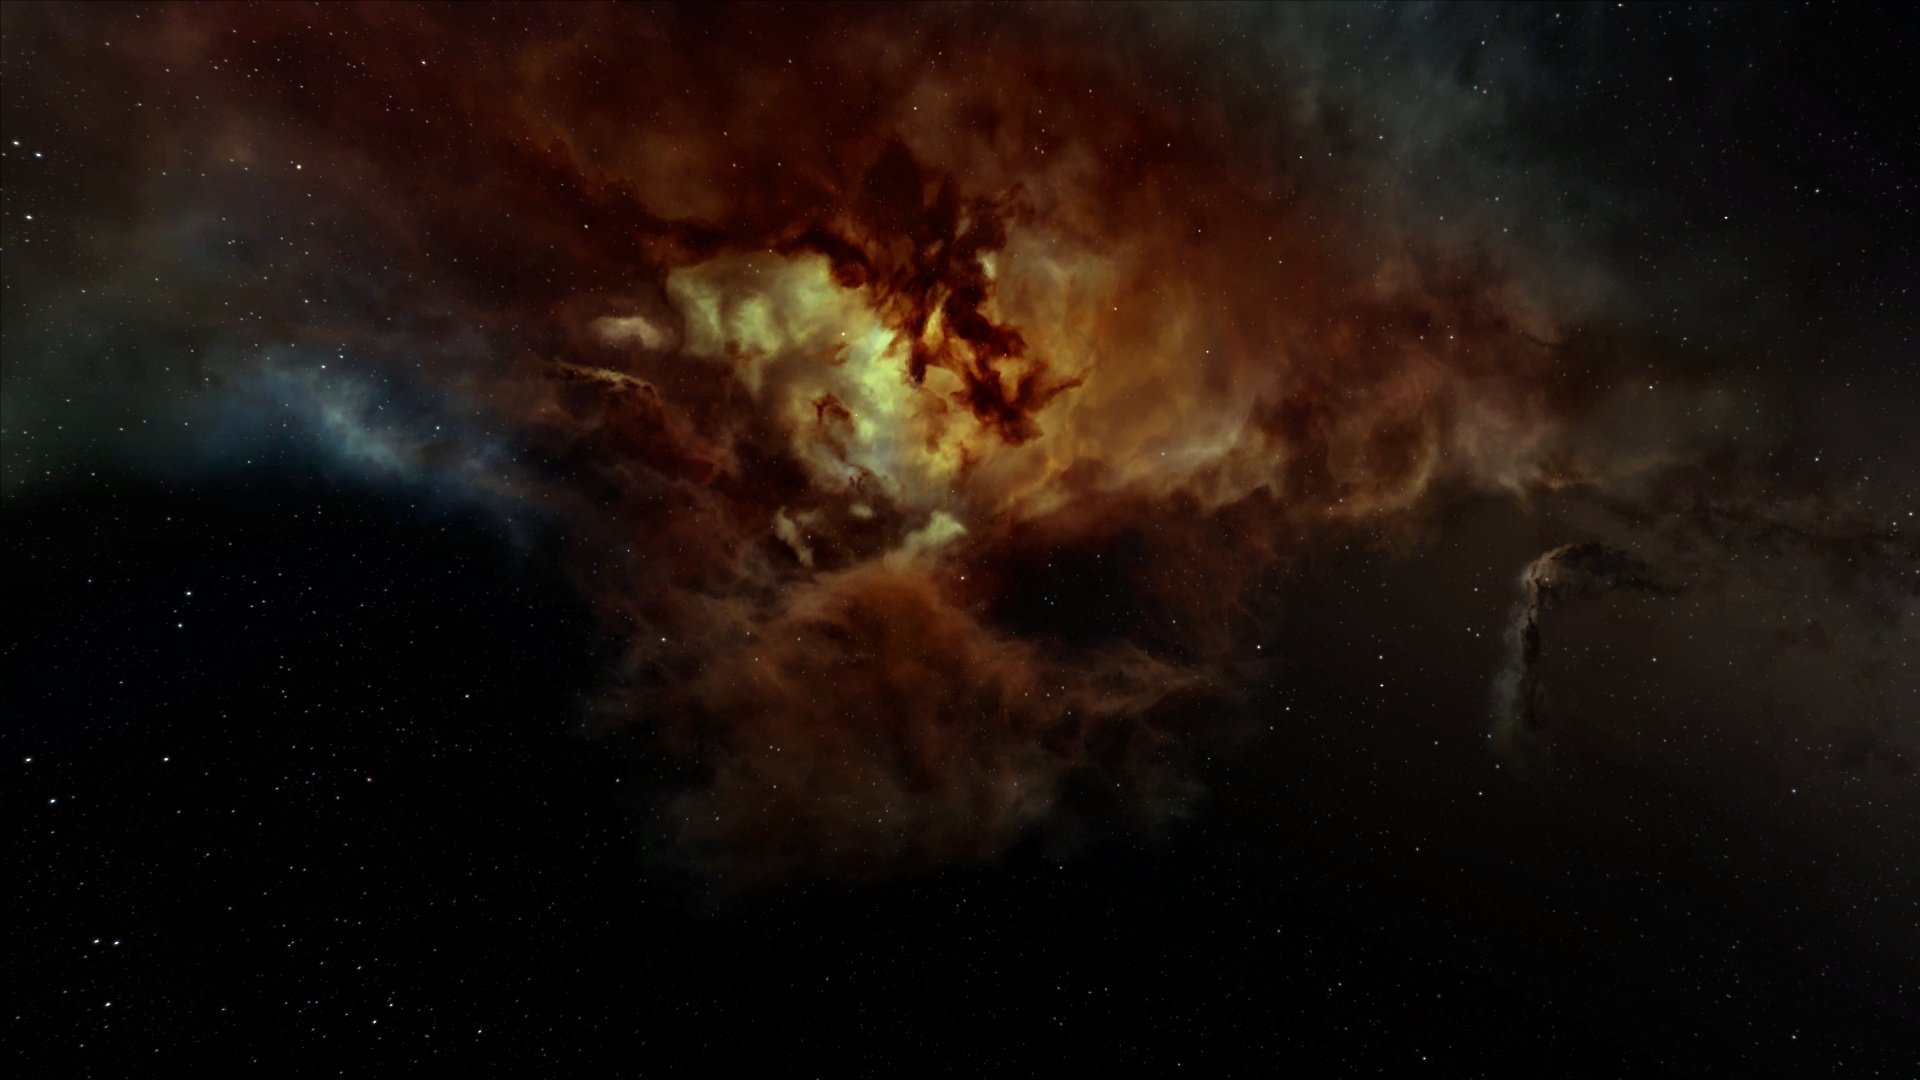 Download 1080p Nebula PC background ID:91952 for free